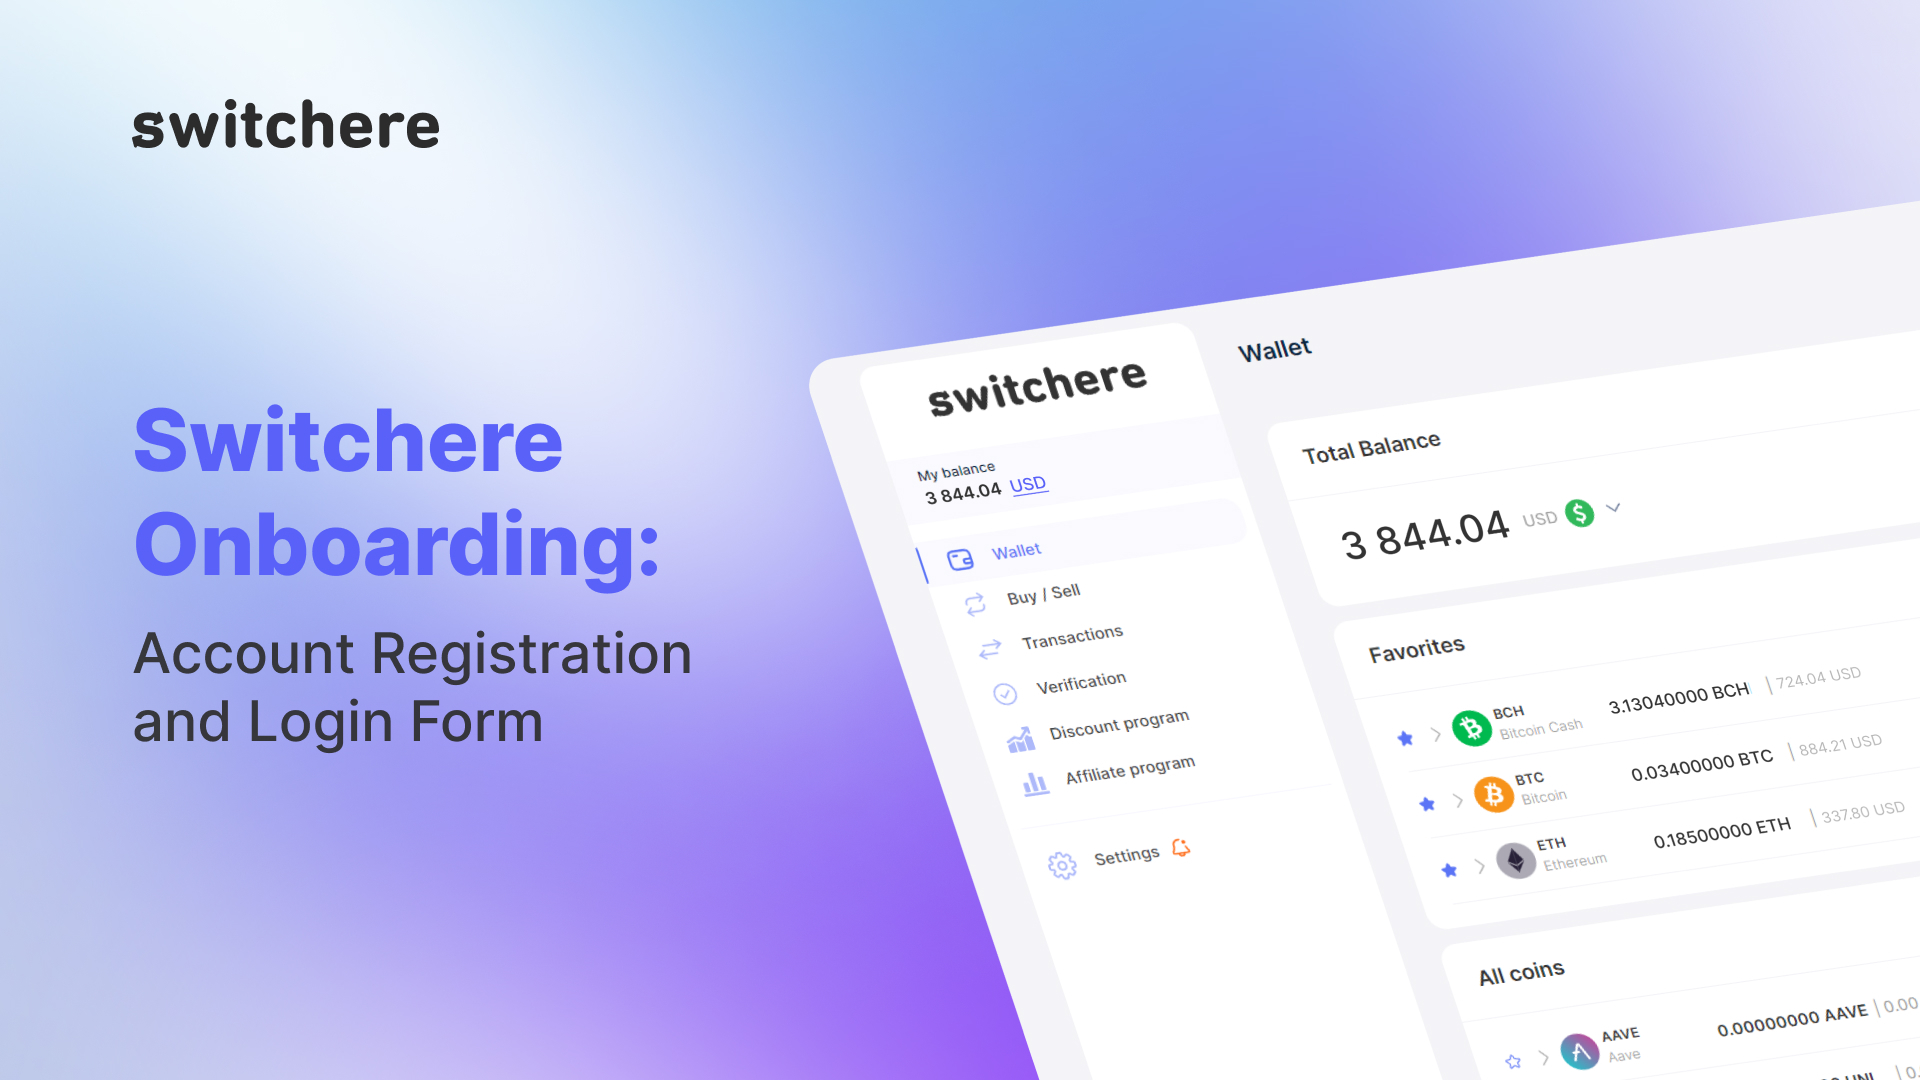 Switchere Onboarding: Account Registration and Login Form